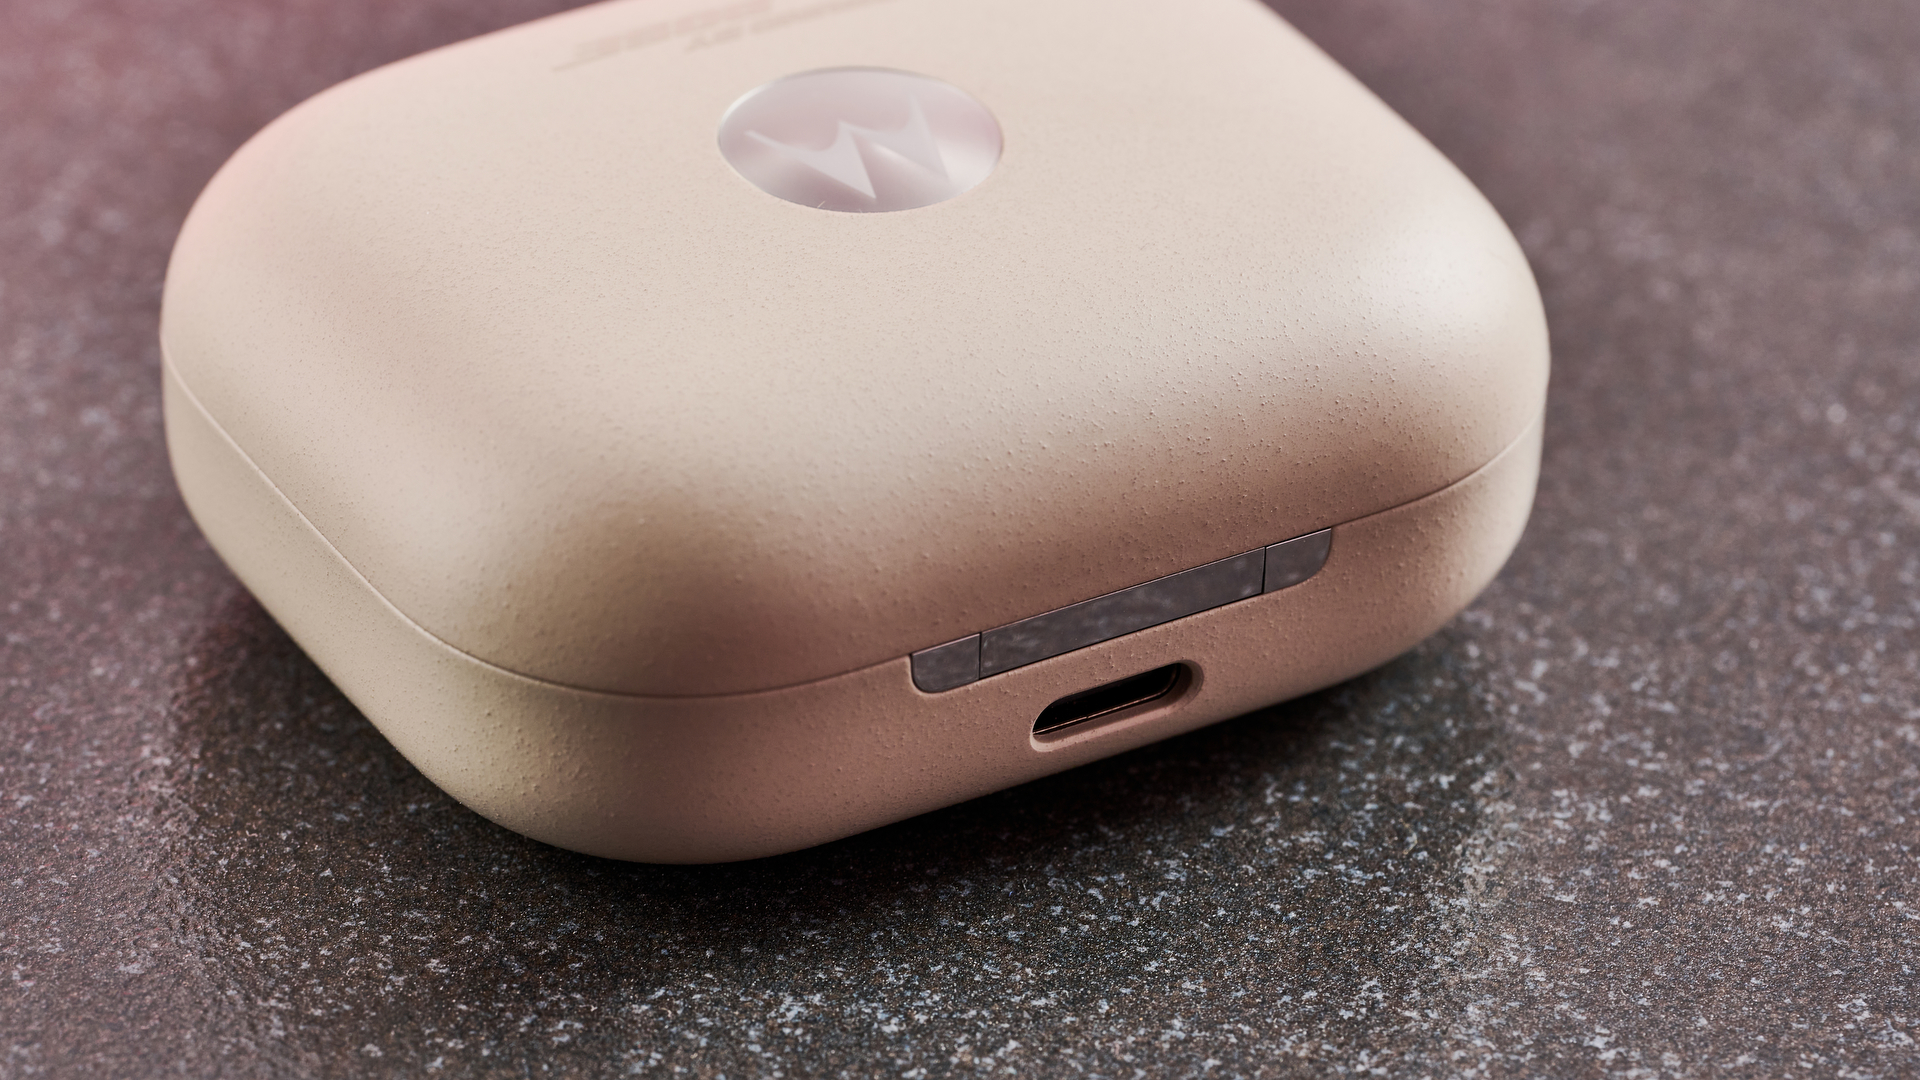 A close up of the front of the Motorola Moto Buds Plus case. It is closed and sitting on a dark surface and is against a pink background.